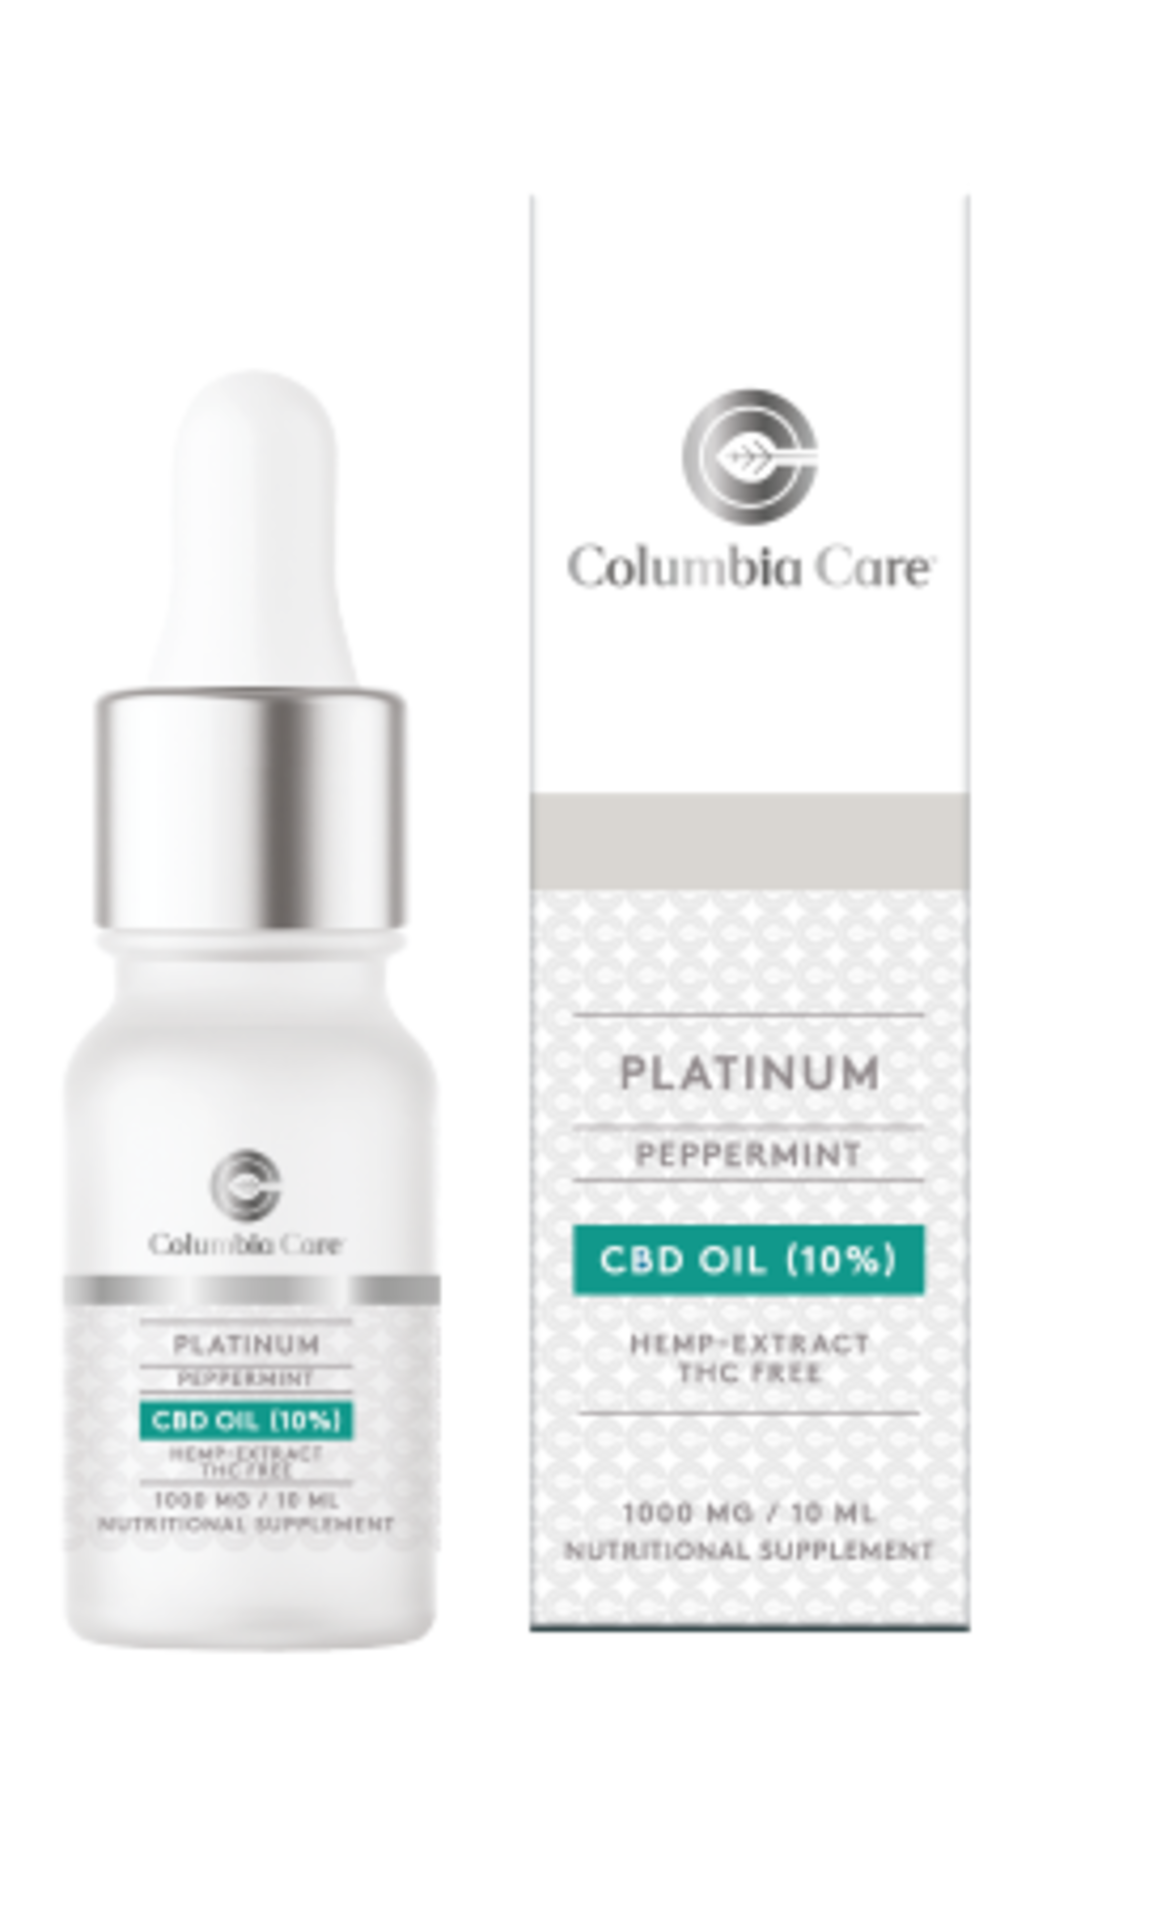 5 x Brand New Columbia Care Platinum Peppermint Flavored Tincture 10ml 1000mg. Columbia Care, a